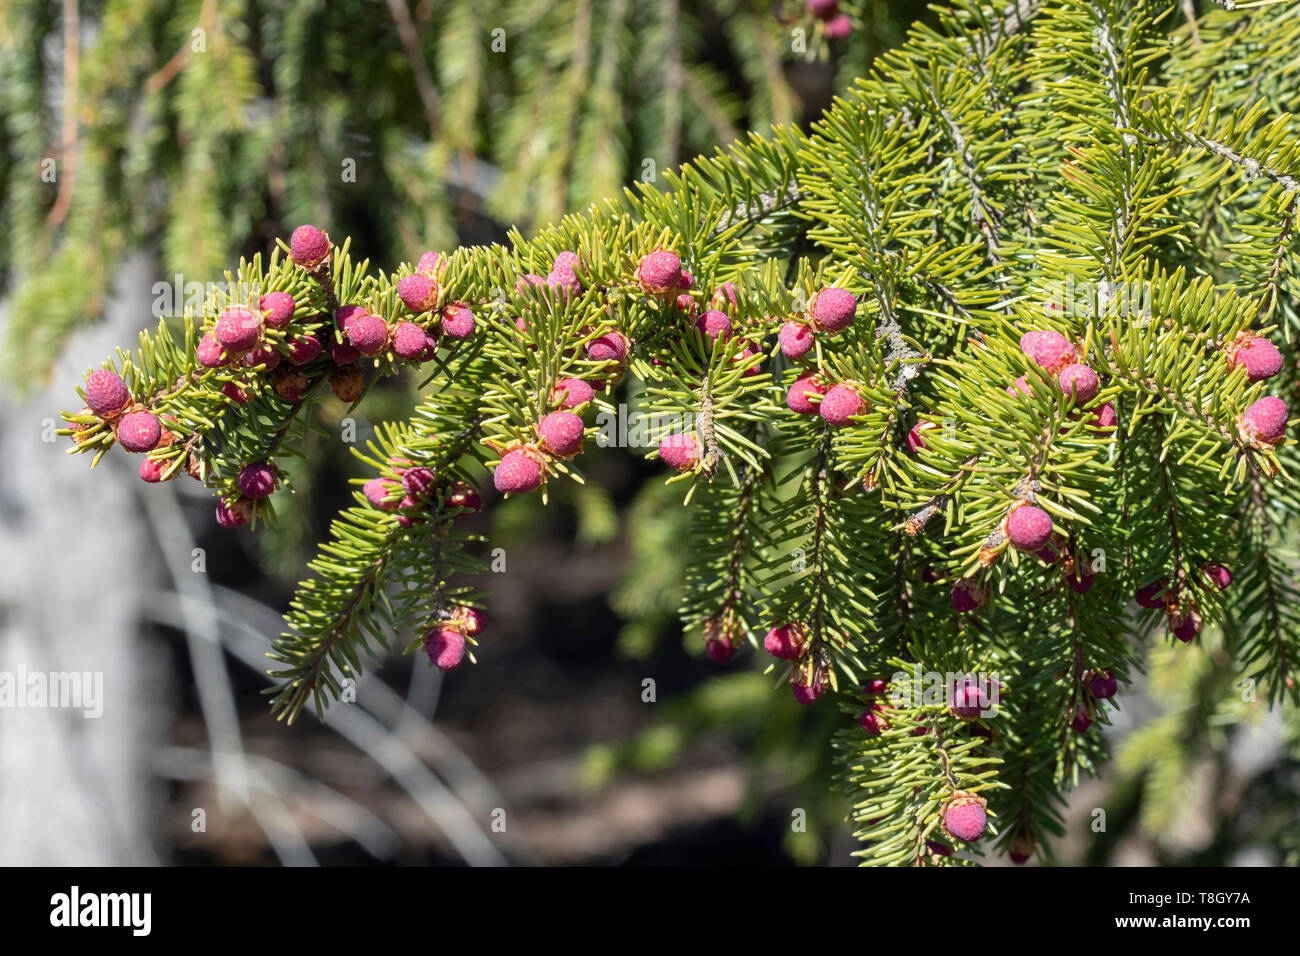 Picea abies, Norway spruce branch with red flower buds, Finland Stock Photo